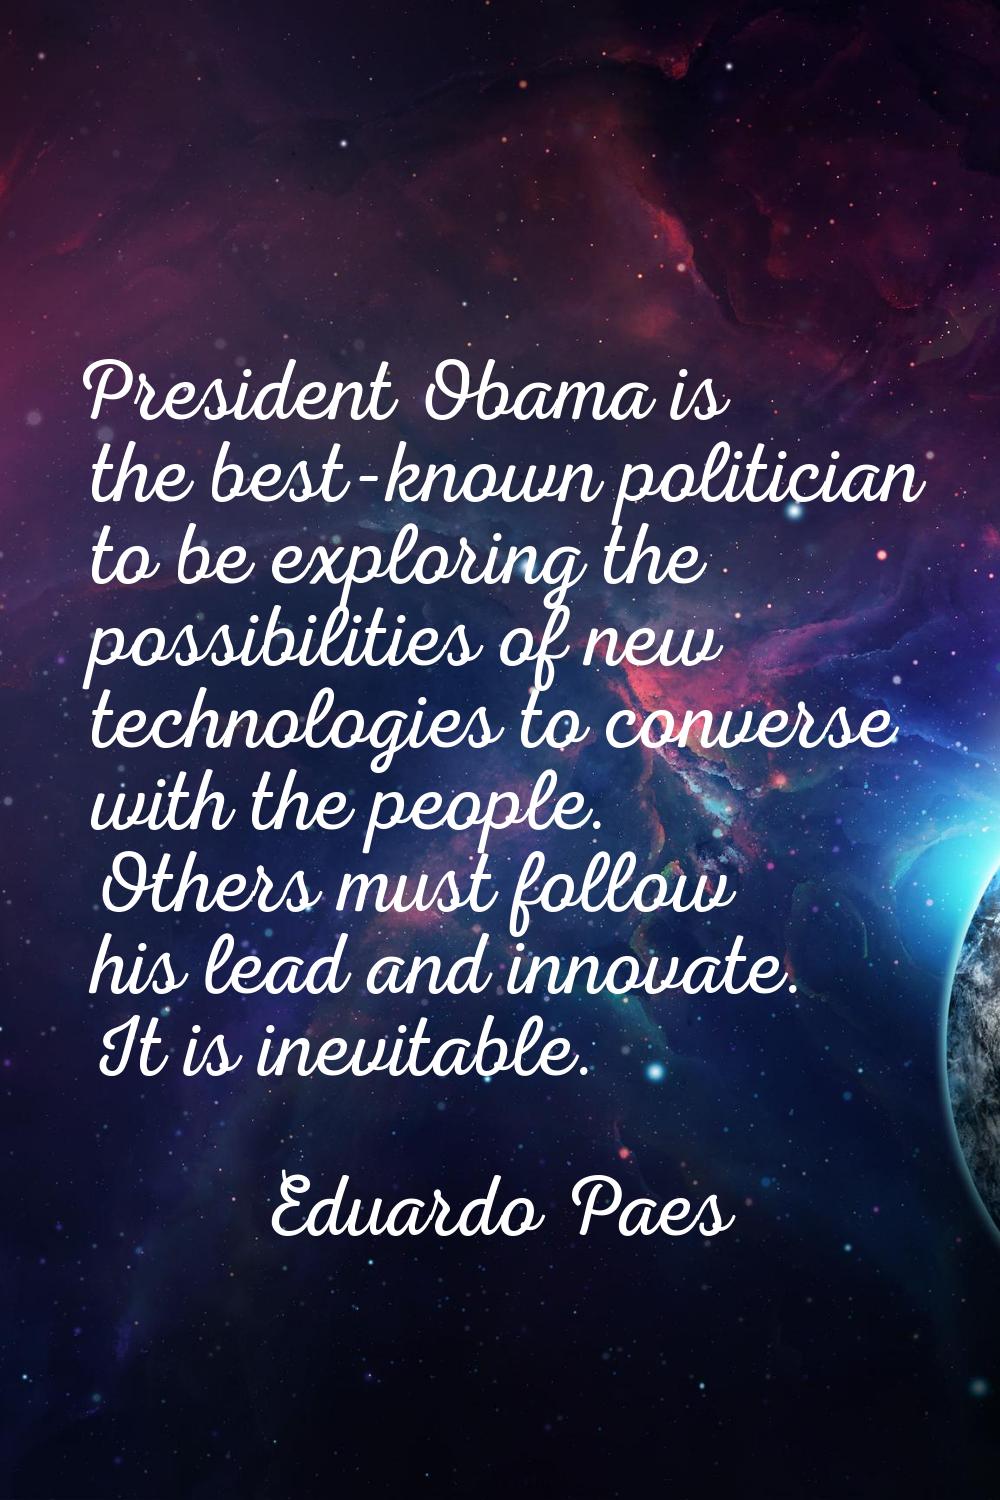 President Obama is the best-known politician to be exploring the possibilities of new technologies 